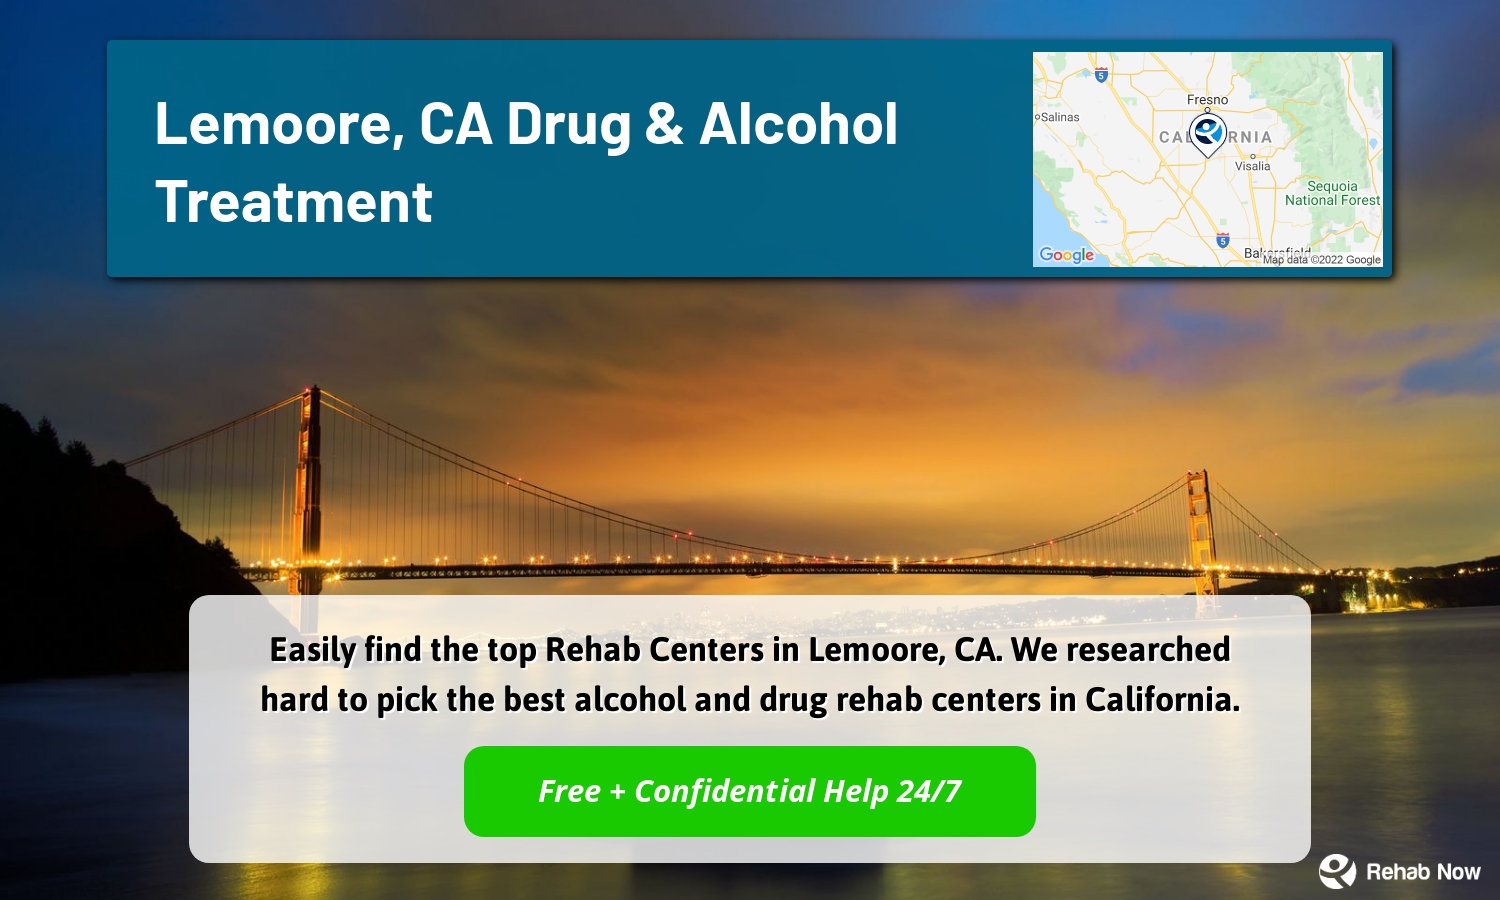 Easily find the top Rehab Centers in Lemoore, CA. We researched hard to pick the best alcohol and drug rehab centers in California.